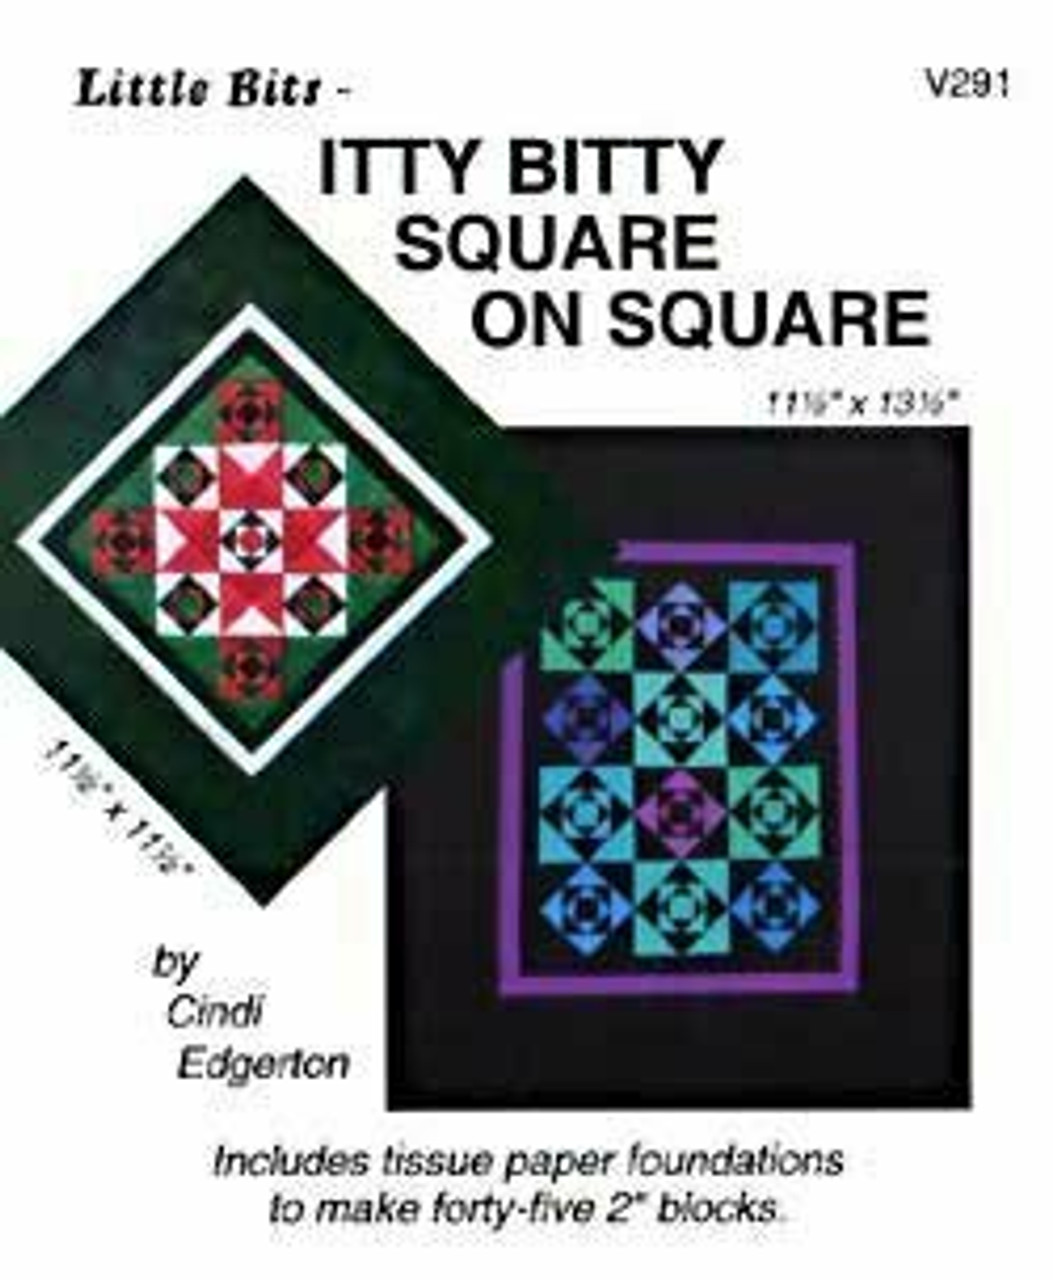 Itty Bitty Square on Square